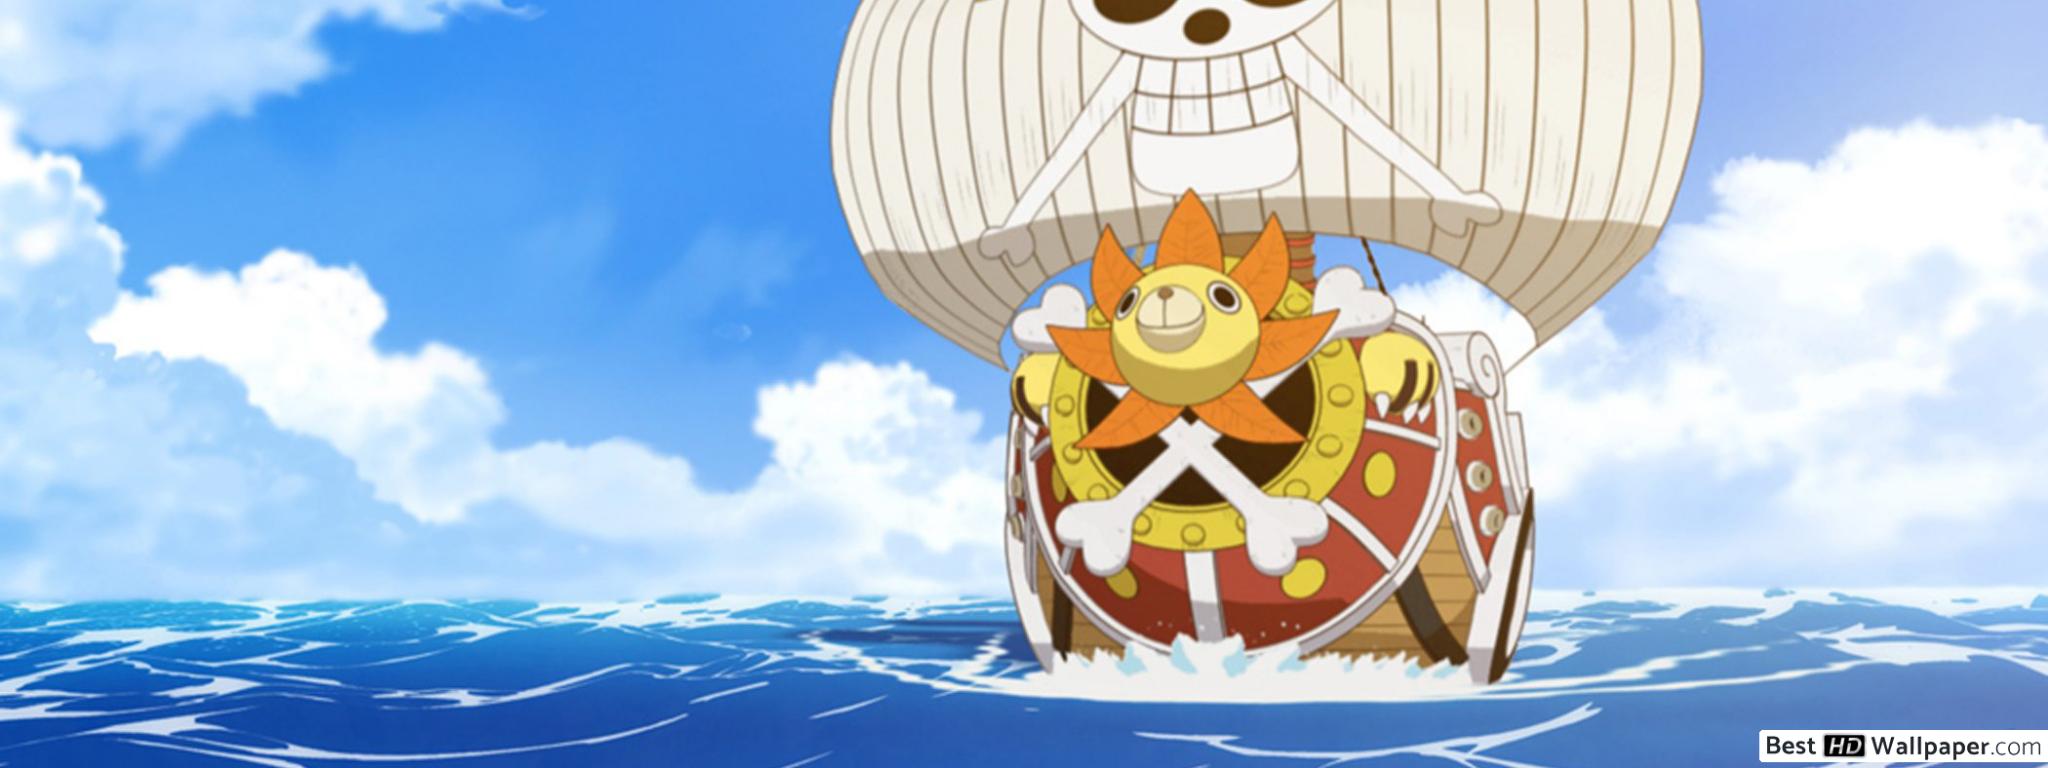 One Piece Sunny, Pirate Ship HD wallpaper download